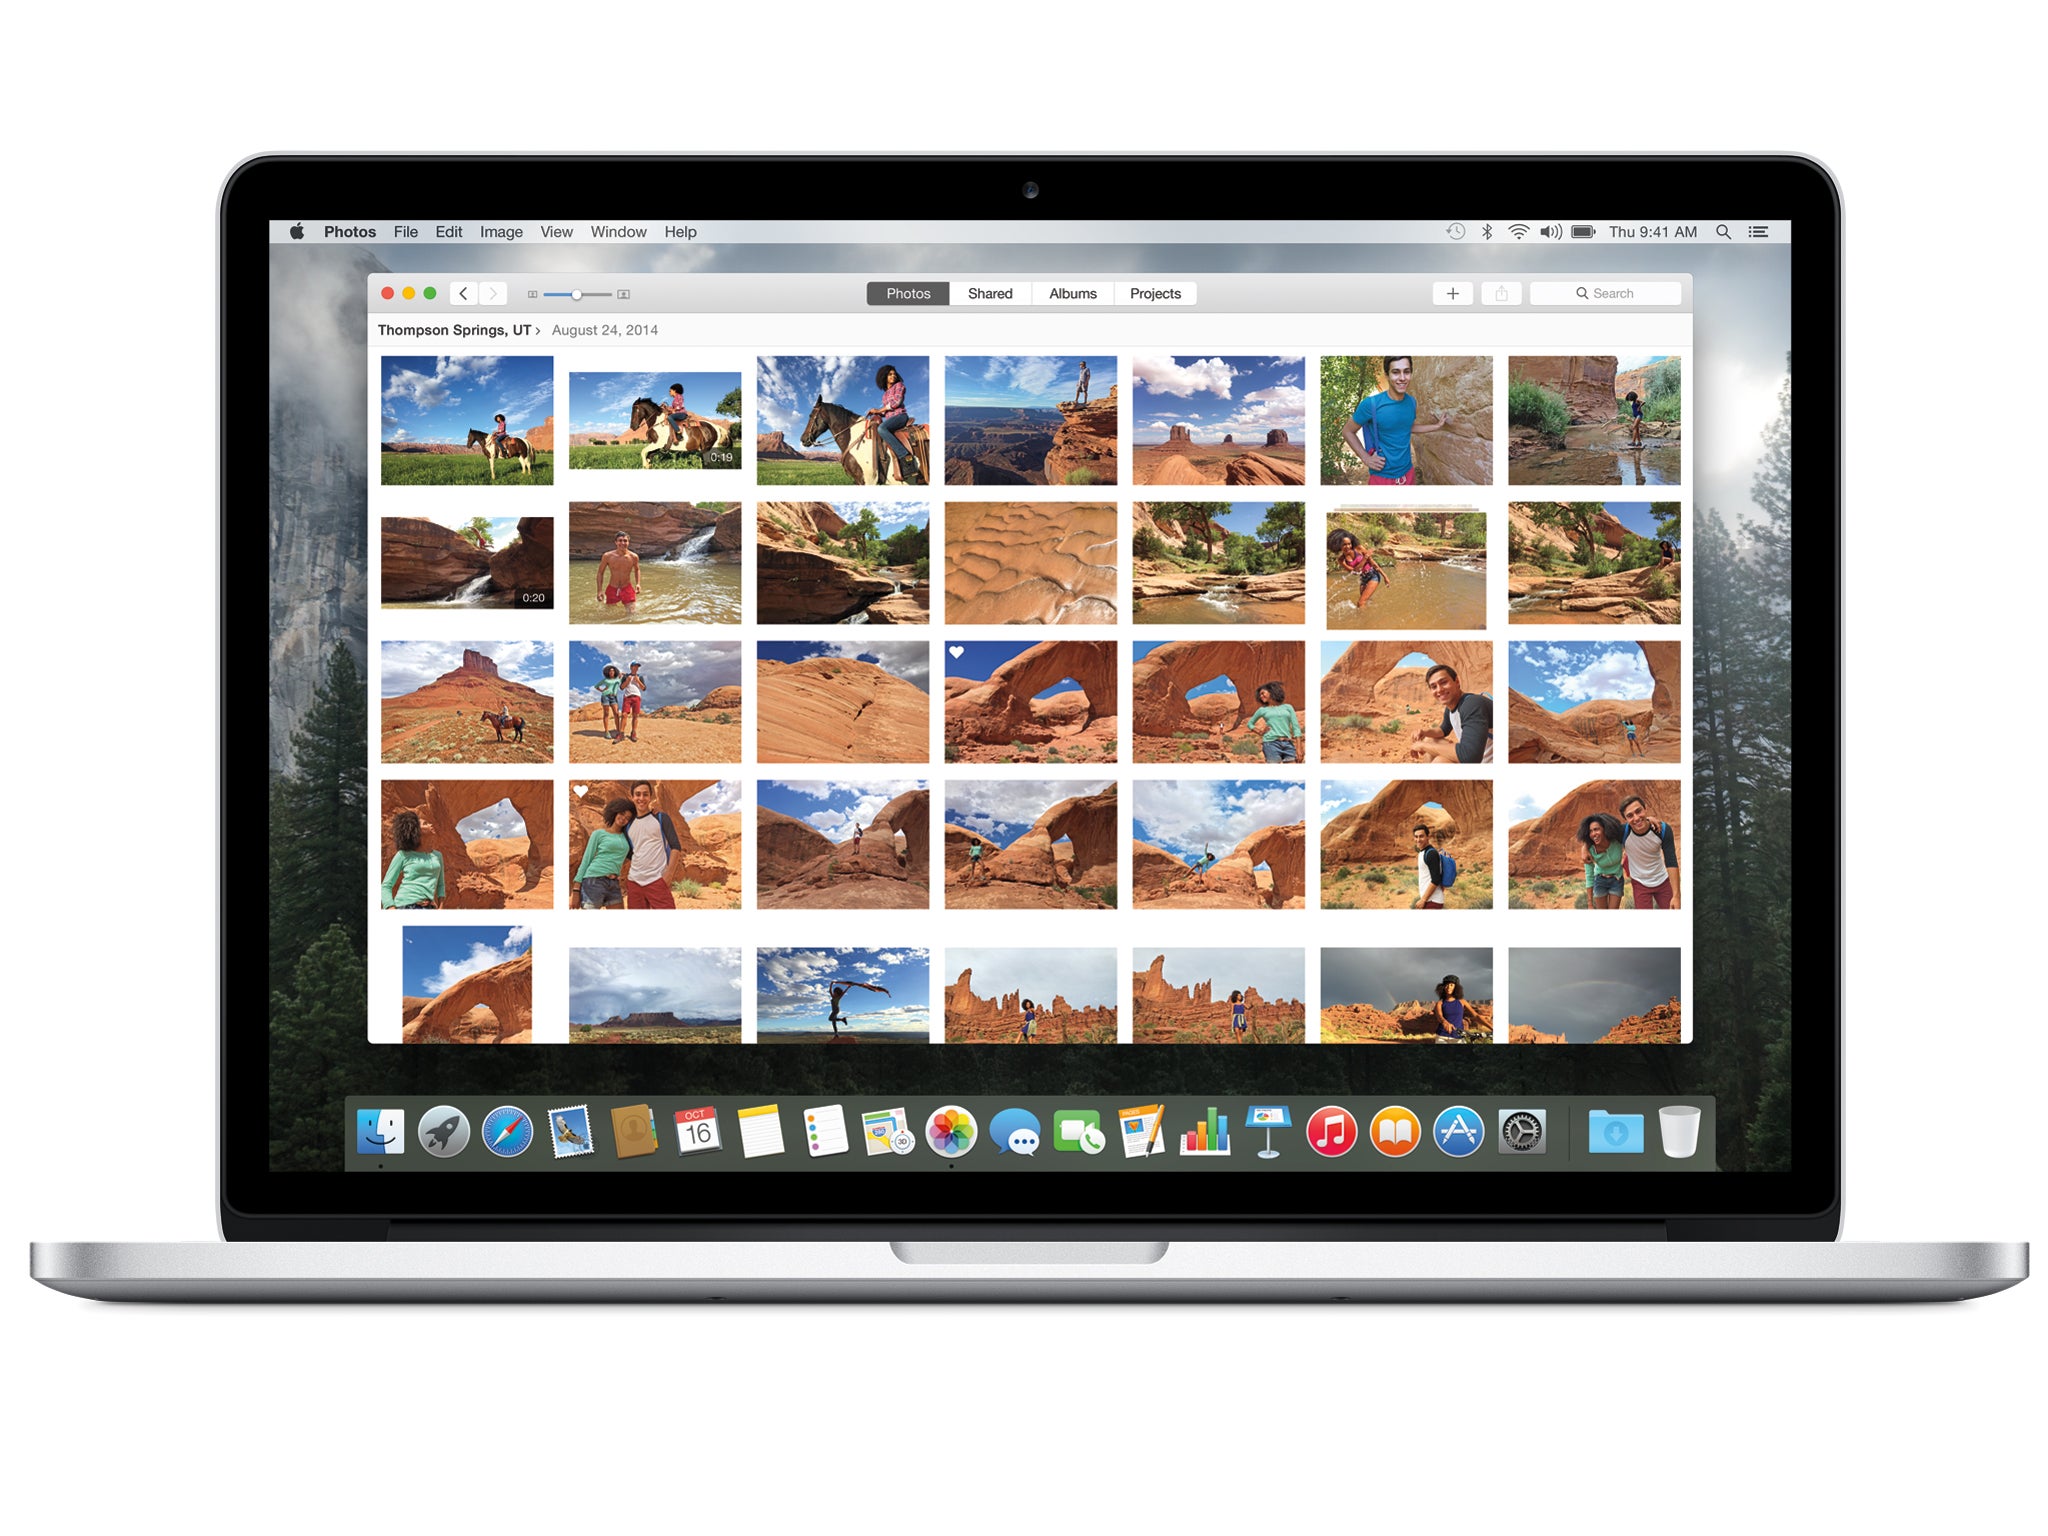 The 'Moments' view of the new Photos app, shown on a MacBook Pro